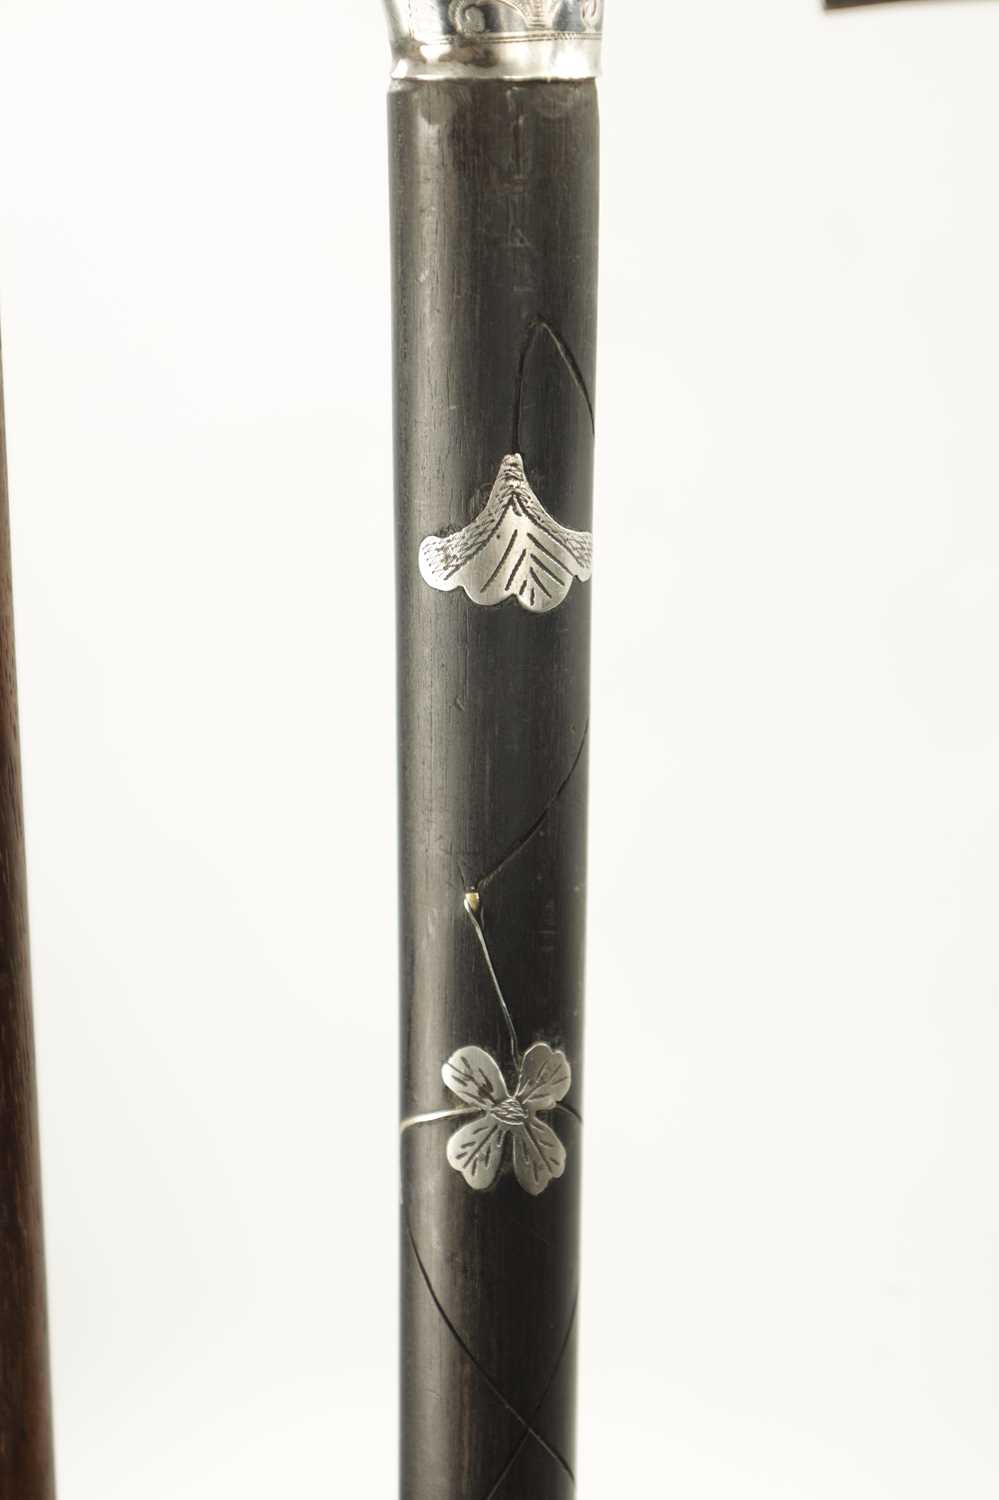 OF GOLFING INTEREST, A COLLECTION OF THREE 19TH CENTURY SILVER TOPPED WALKING STICKS - Image 7 of 9